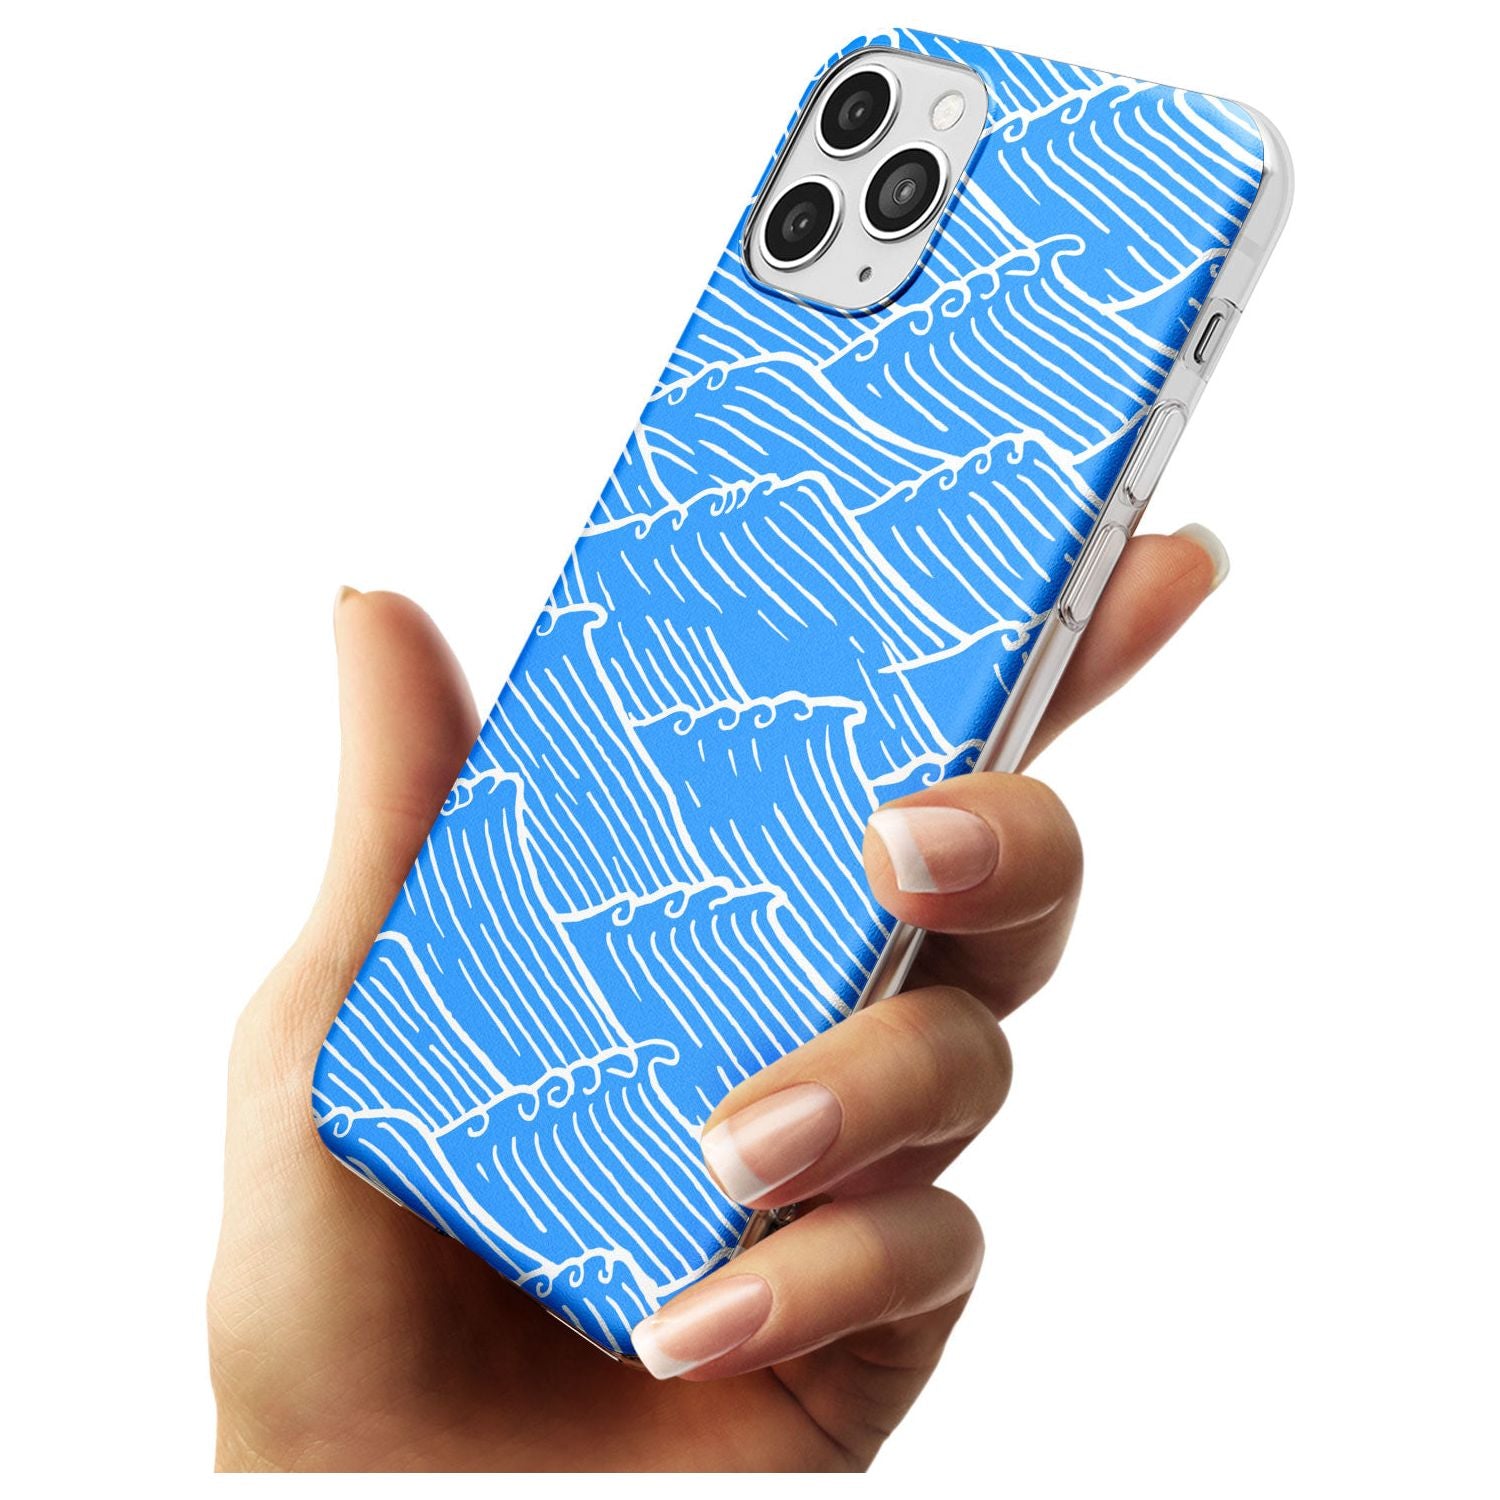 Waves Pattern Slim TPU Phone Case for iPhone 11 Pro Max